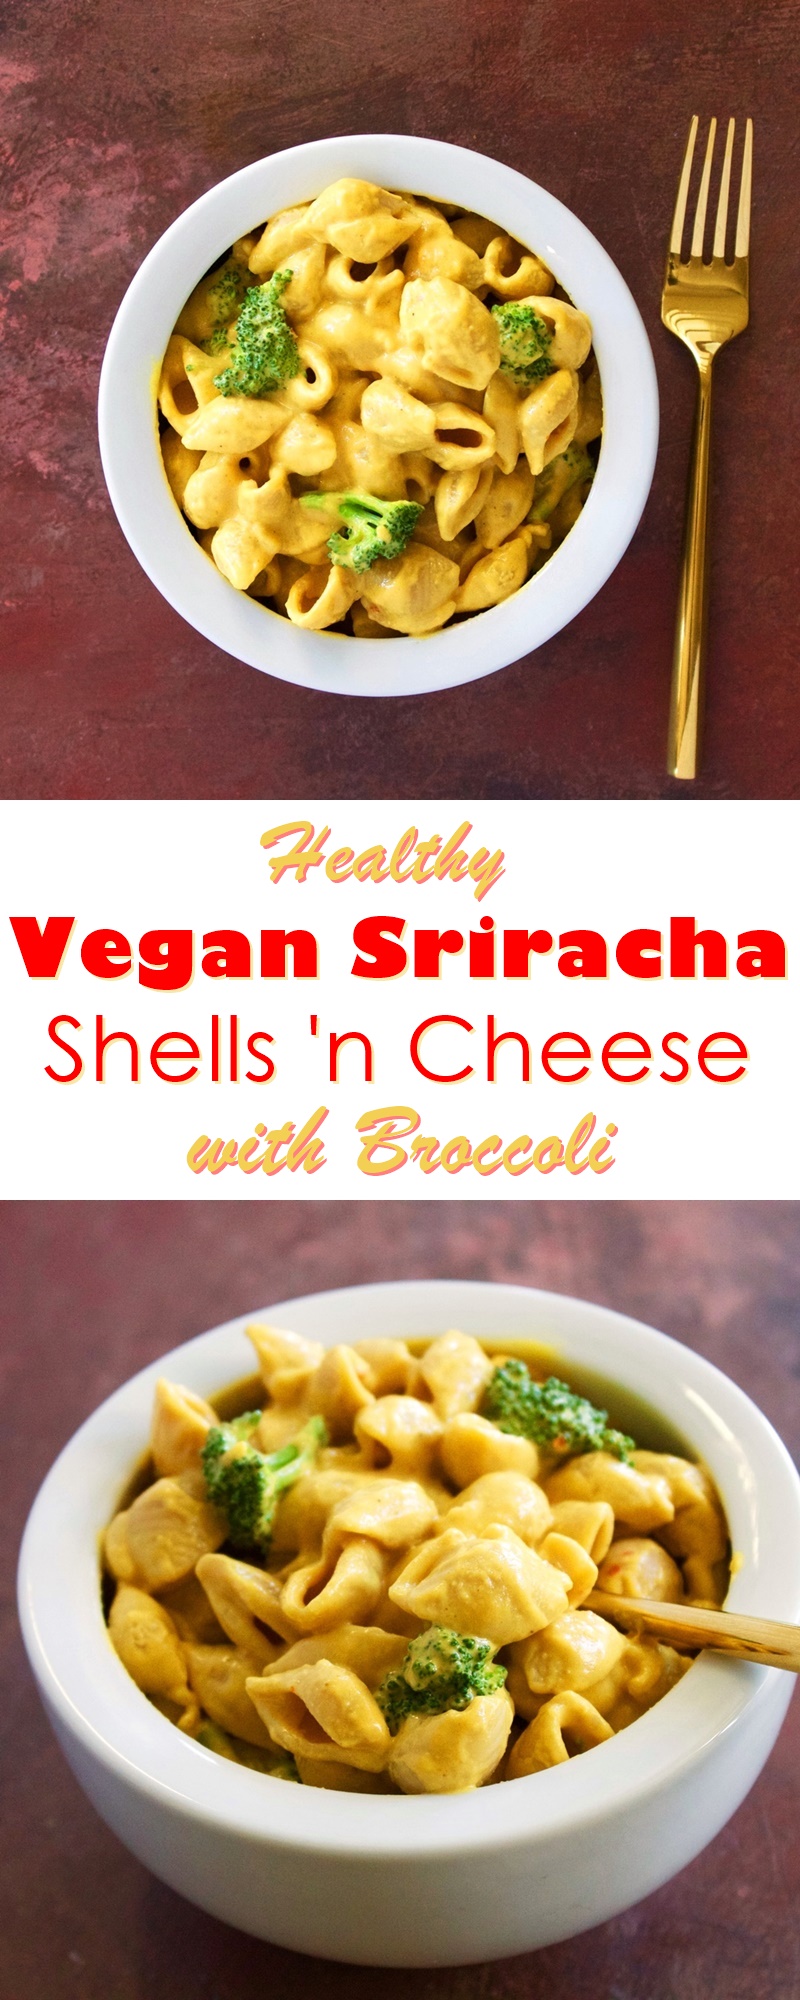 Vegan Sriracha Shells 'n Cheese Recipe (nutritious, protein-rich, dairy-free, gluten-free and soy-free!)